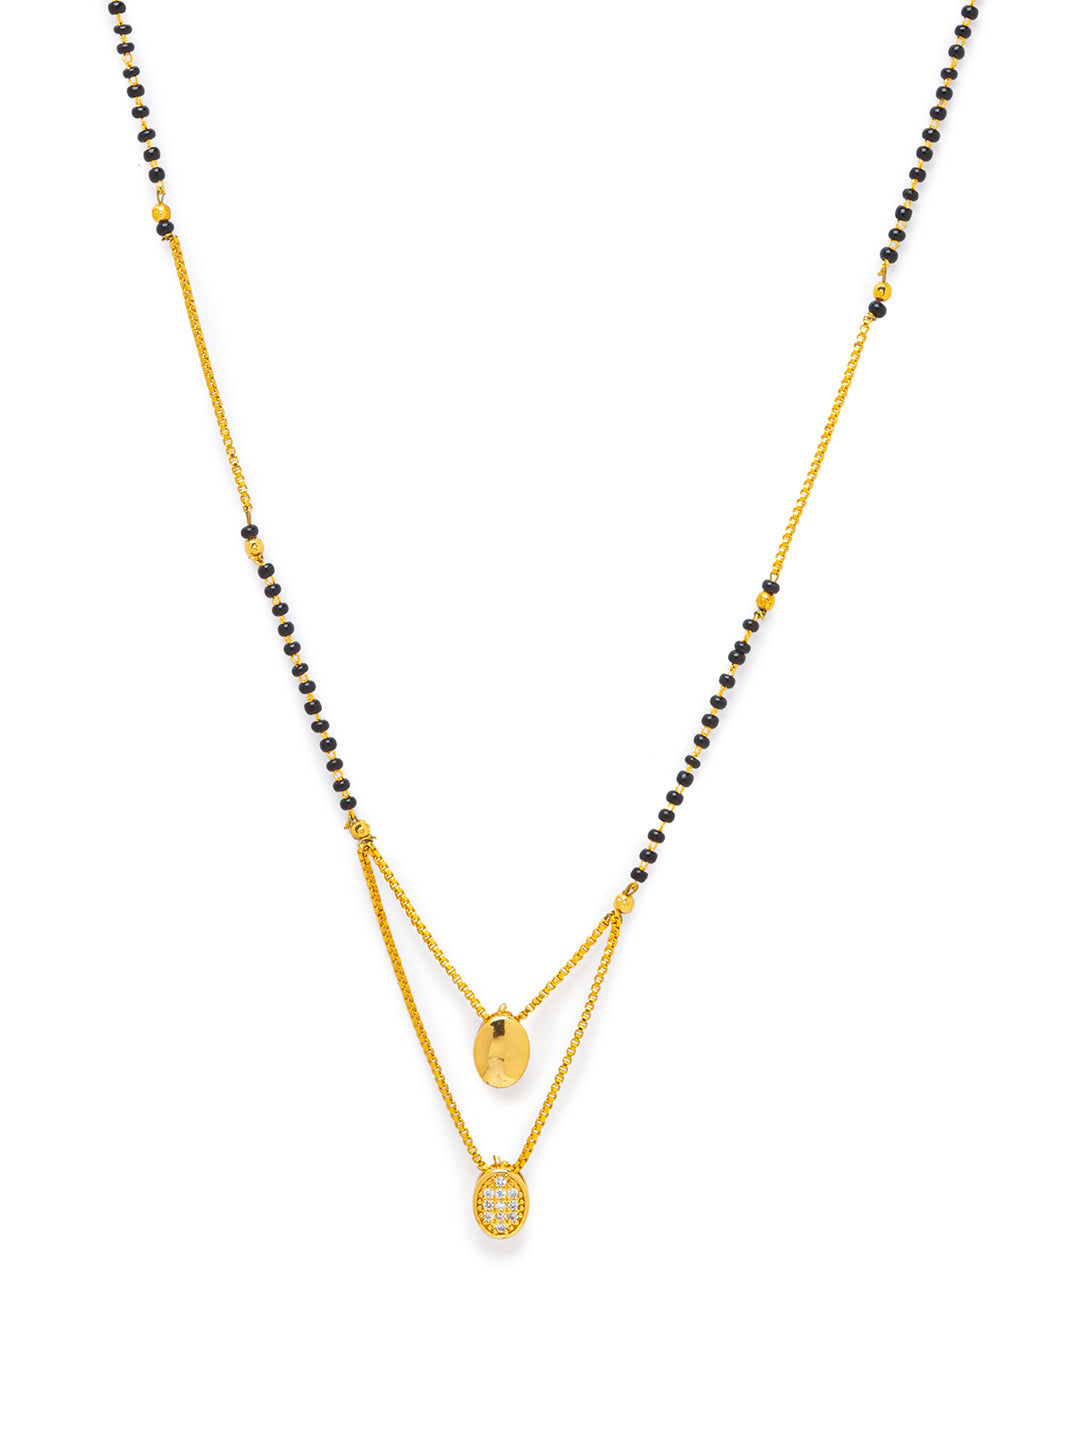 Digital Dress Room Digital Dress Room Diamond Gold Plated Short Mangalsutra मंगलसूत्र Latest Design/Cz Solitaire/Black Beads Chain Heart Love Shape Pendant  New Mangalsutra Designs For Women (20 Inches) 